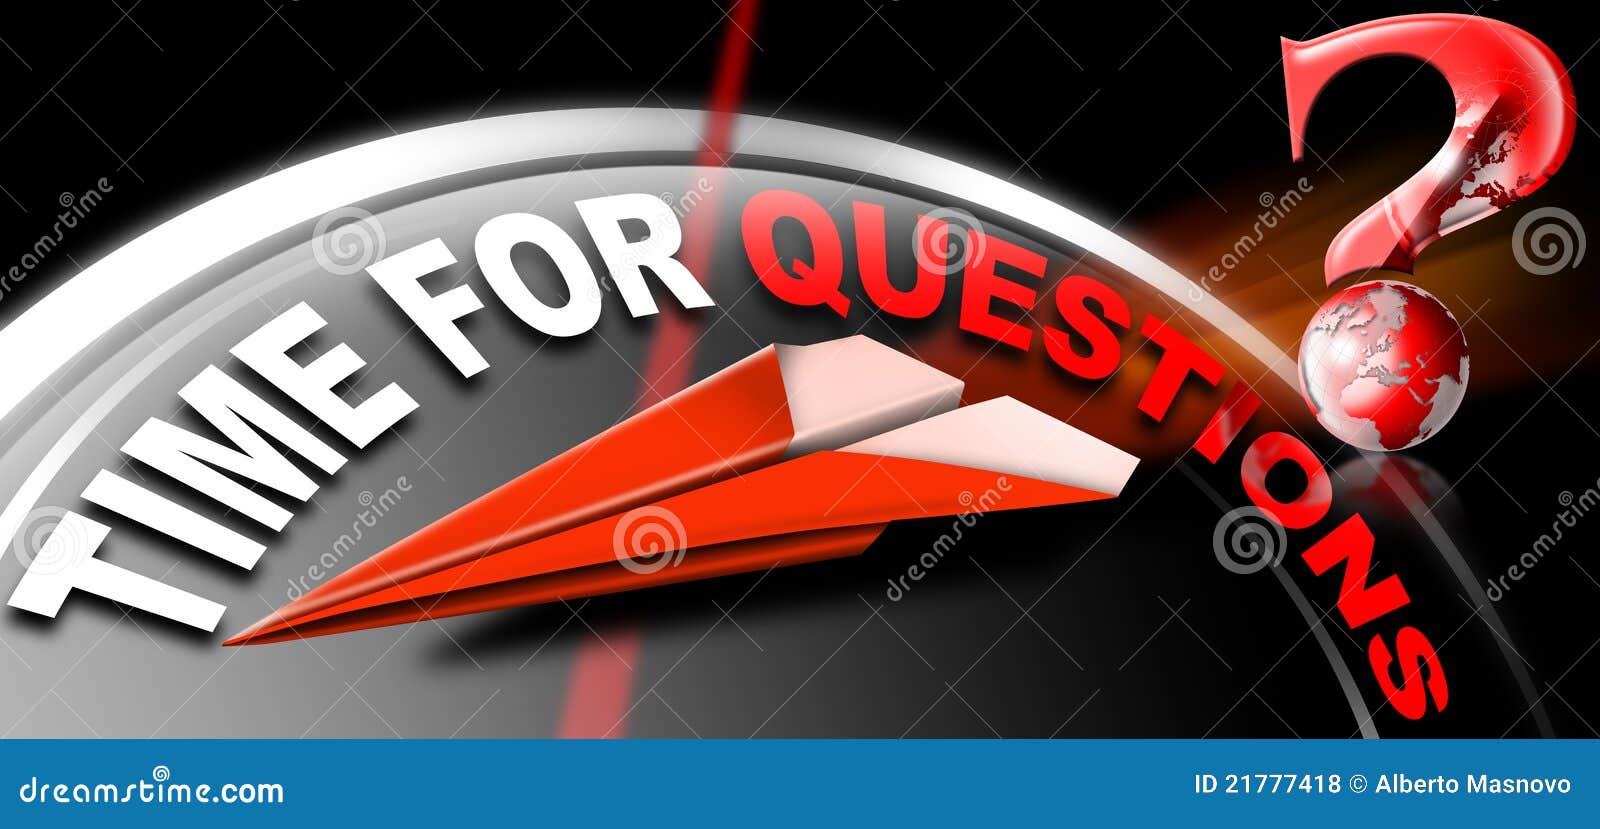 question time clipart - photo #26